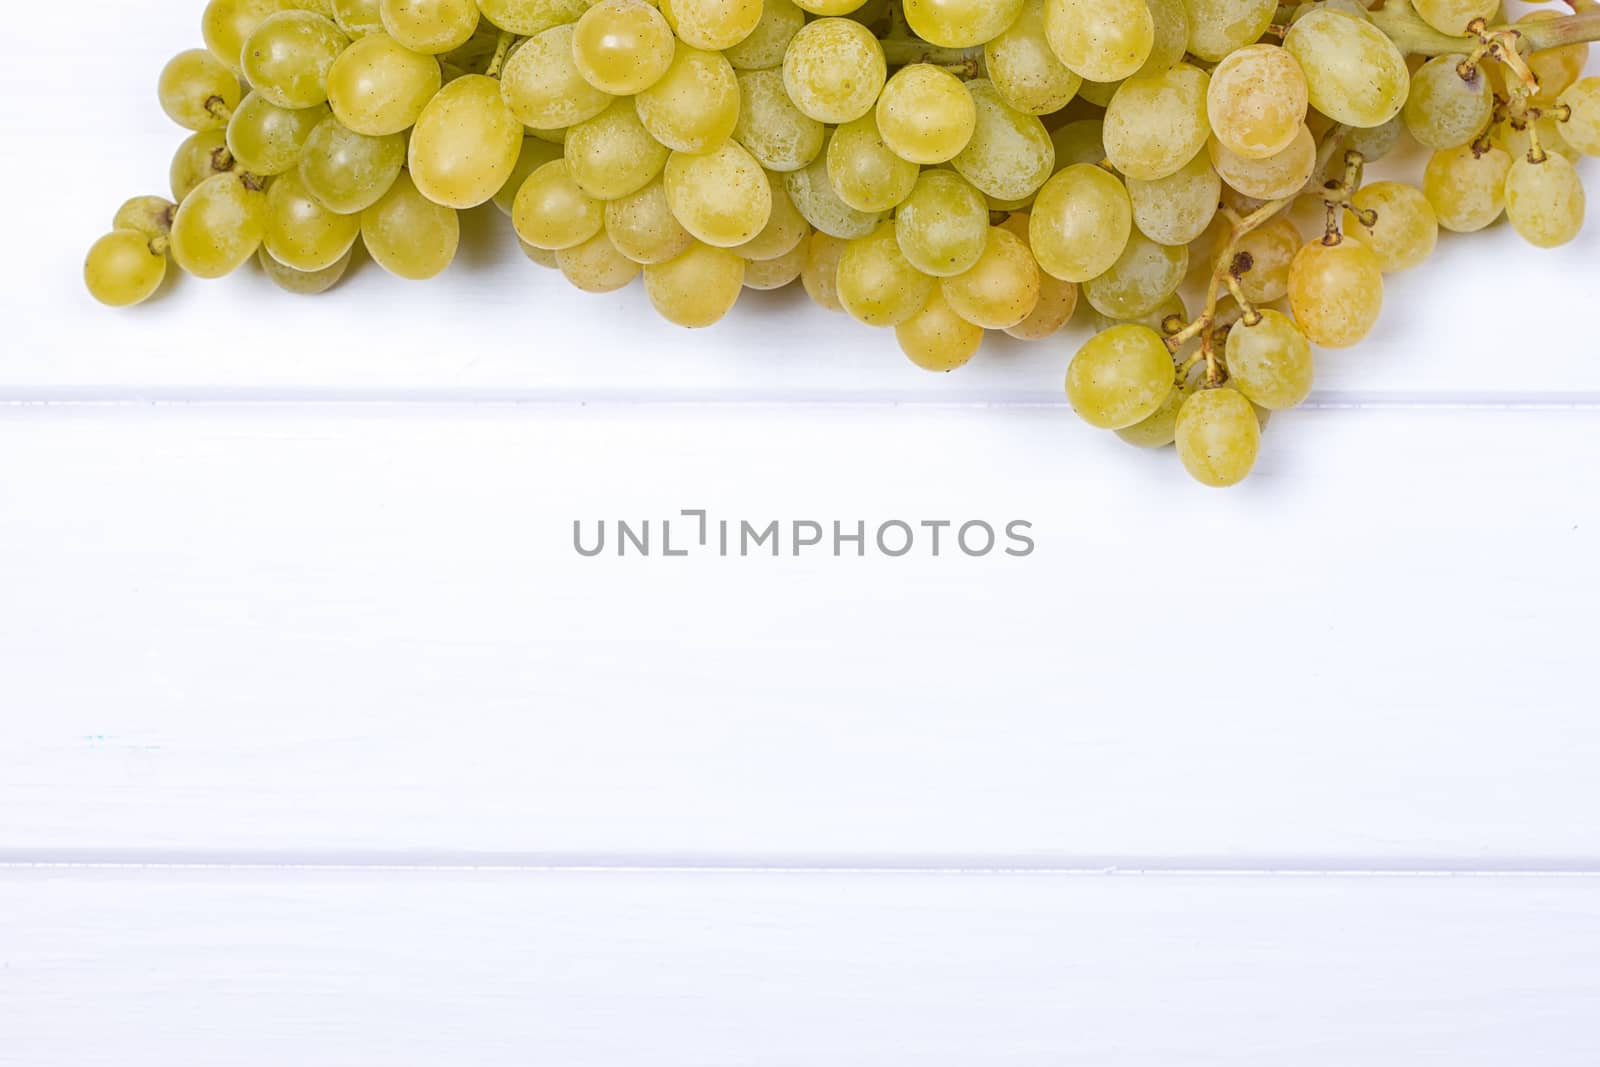 White grapes on white wooden surface by victosha